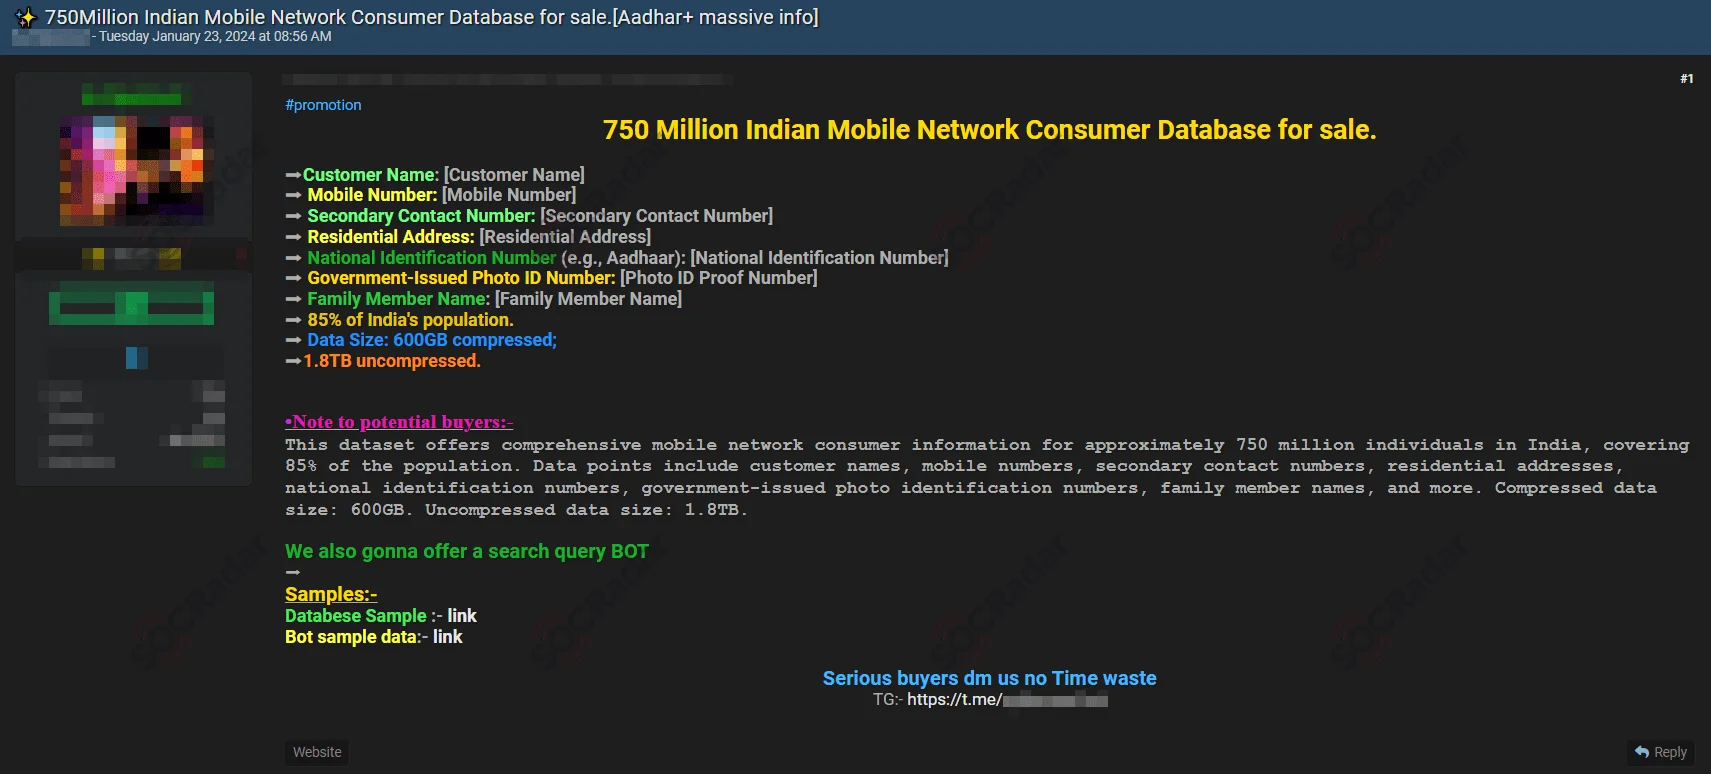 Alleged Sale of 750 Million Indian Mobile Consumer Records Detected